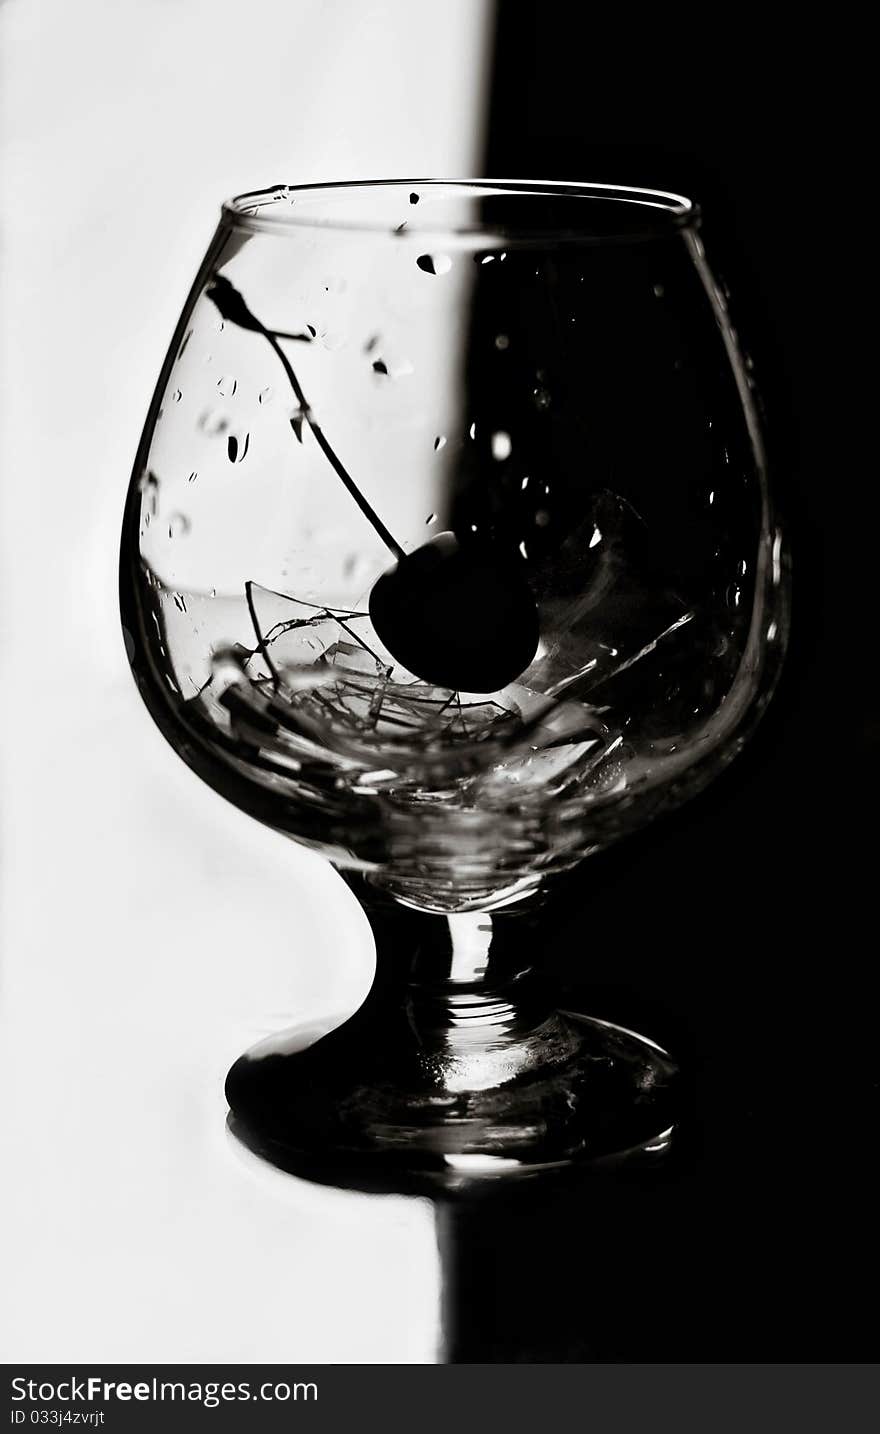 The Black-and-white image of a cherry in a glass with beaten glass